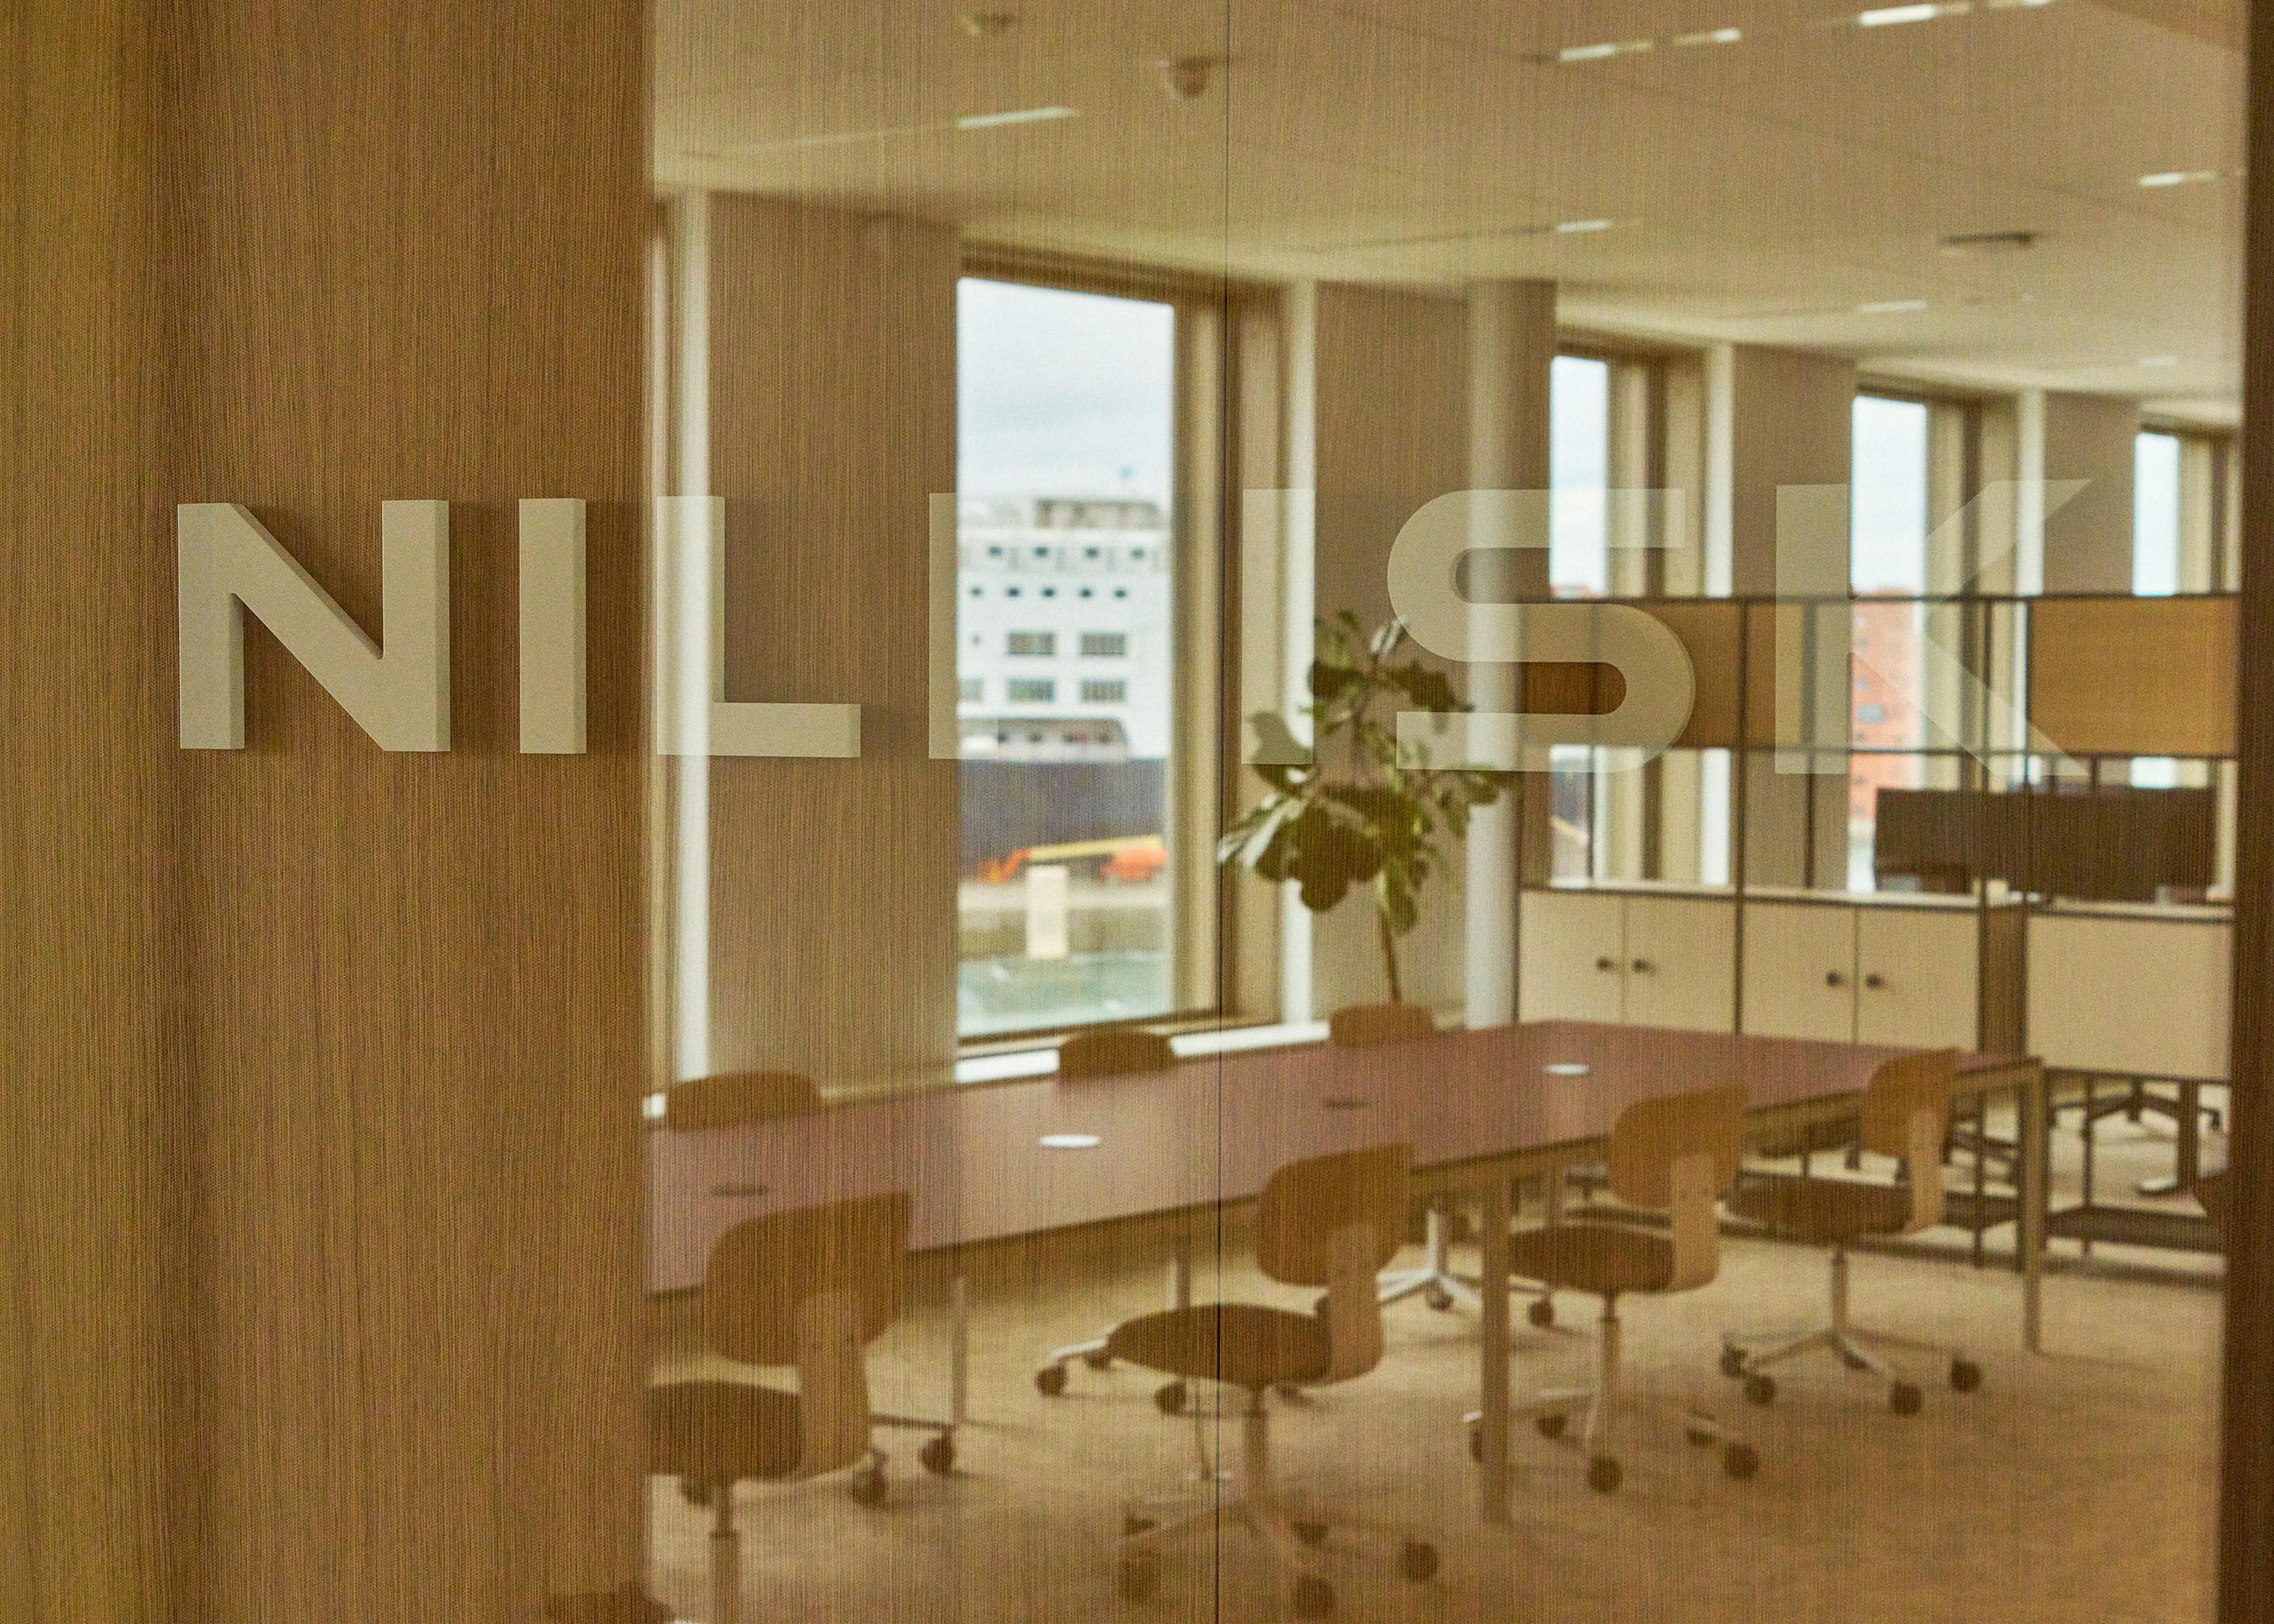 About Nilfisk Group